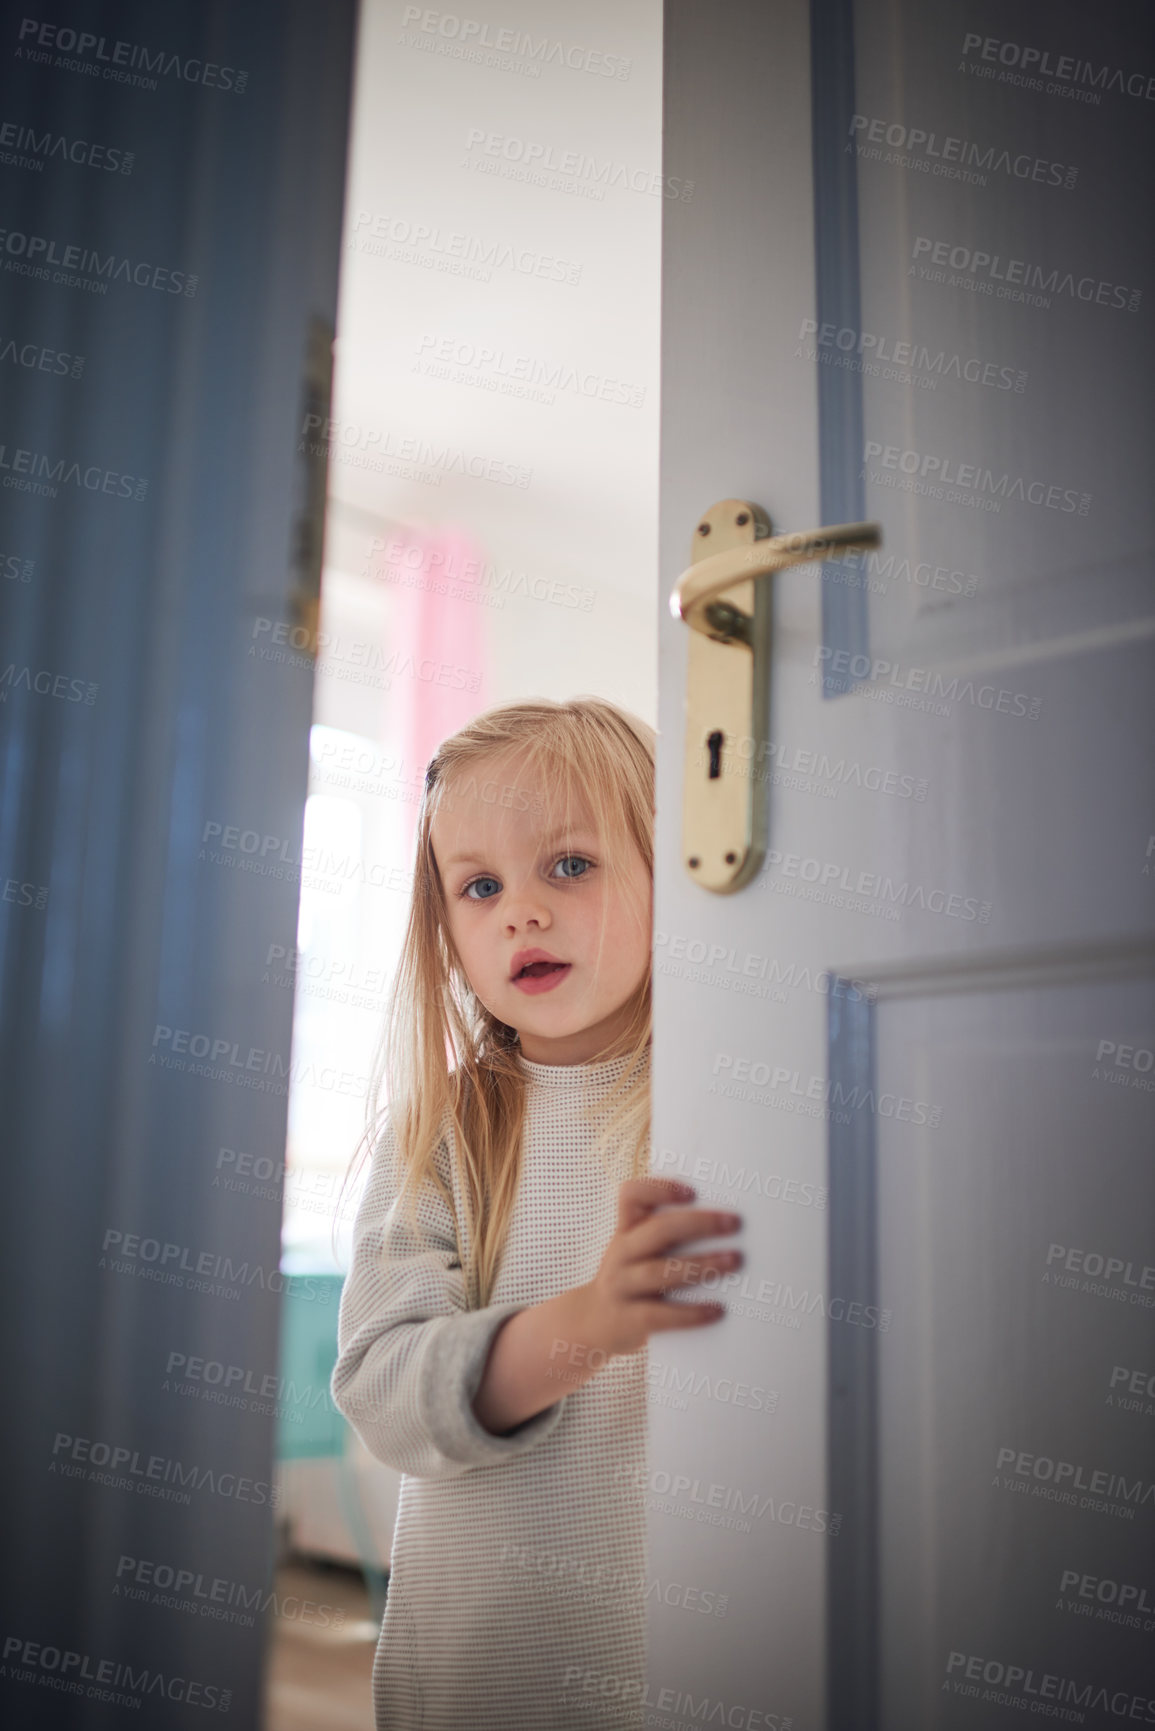 Buy stock photo Shot of an adorable little girl opening a door at home